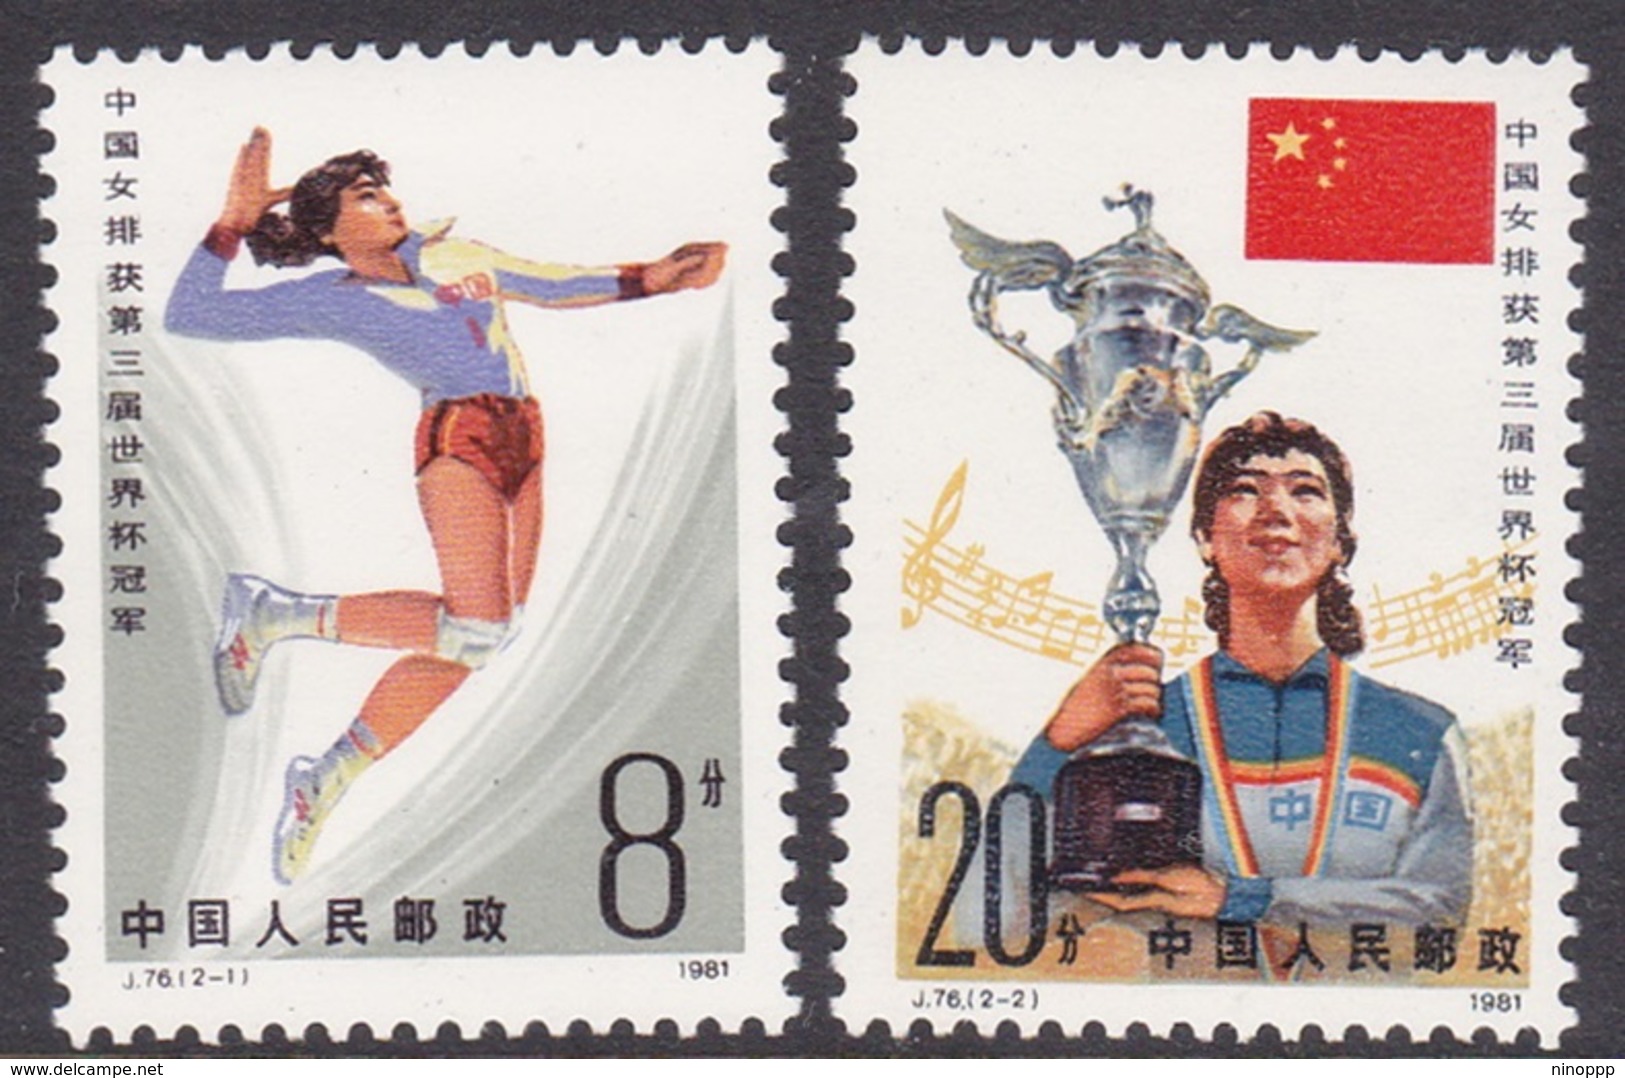 China People's Republic SG 3081-83 1981 Women's Team Victory In 3rd World Cup Volleyball Championship, Mint Never Hinged - Unused Stamps